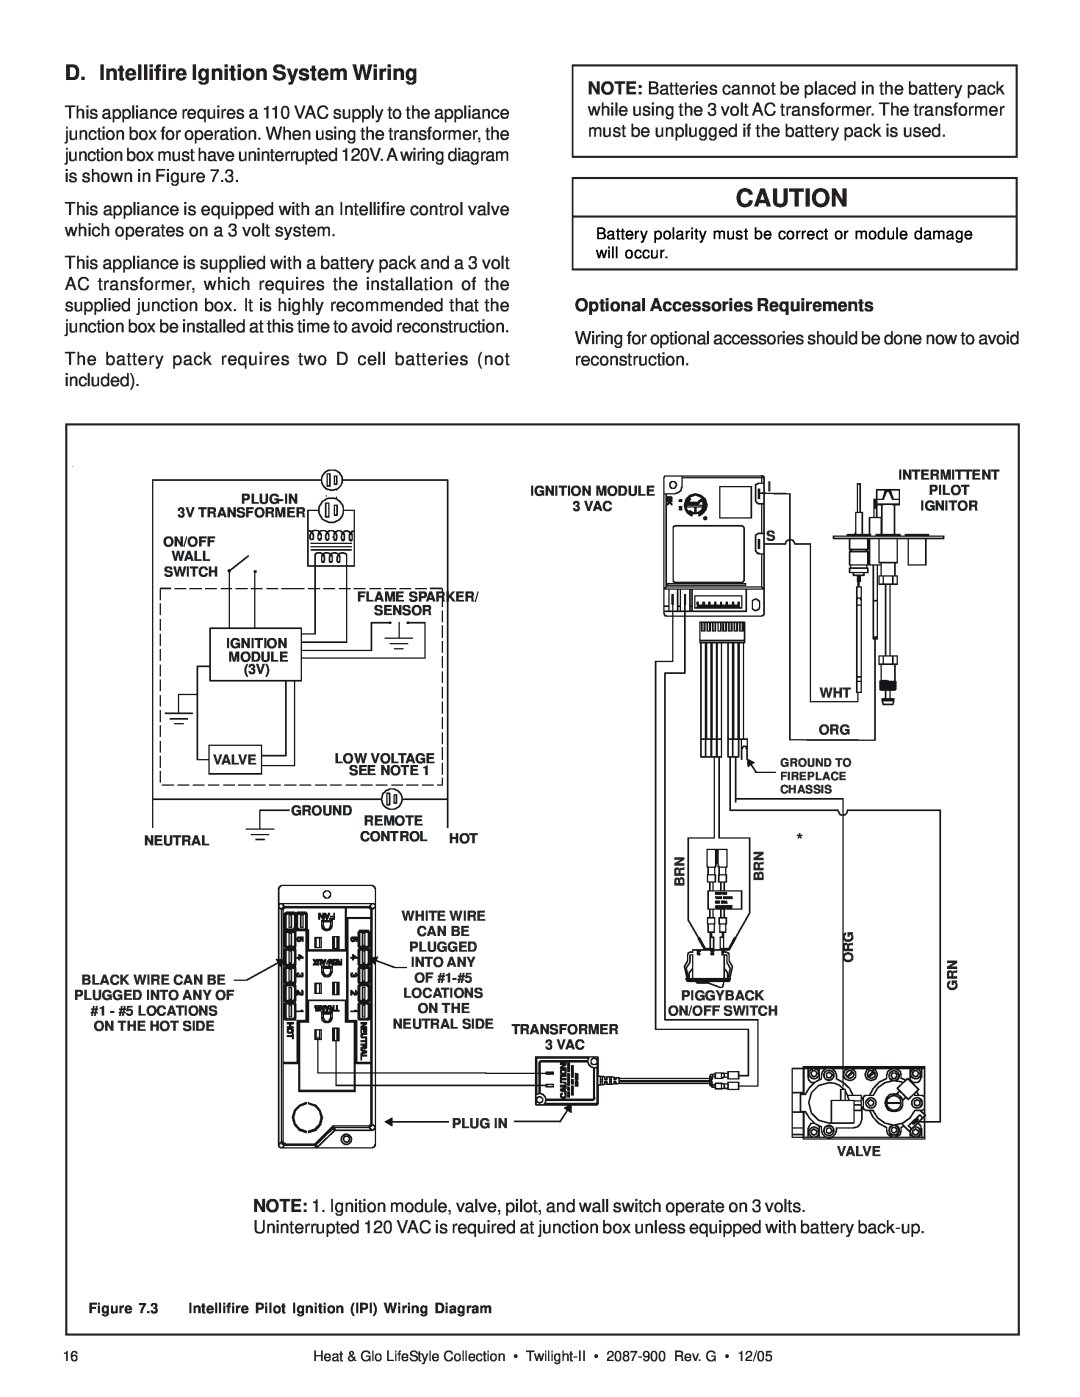 Heat & Glo LifeStyle TWILIGHT-II owner manual D. Intellifire Ignition System Wiring, Optional Accessories Requirements 